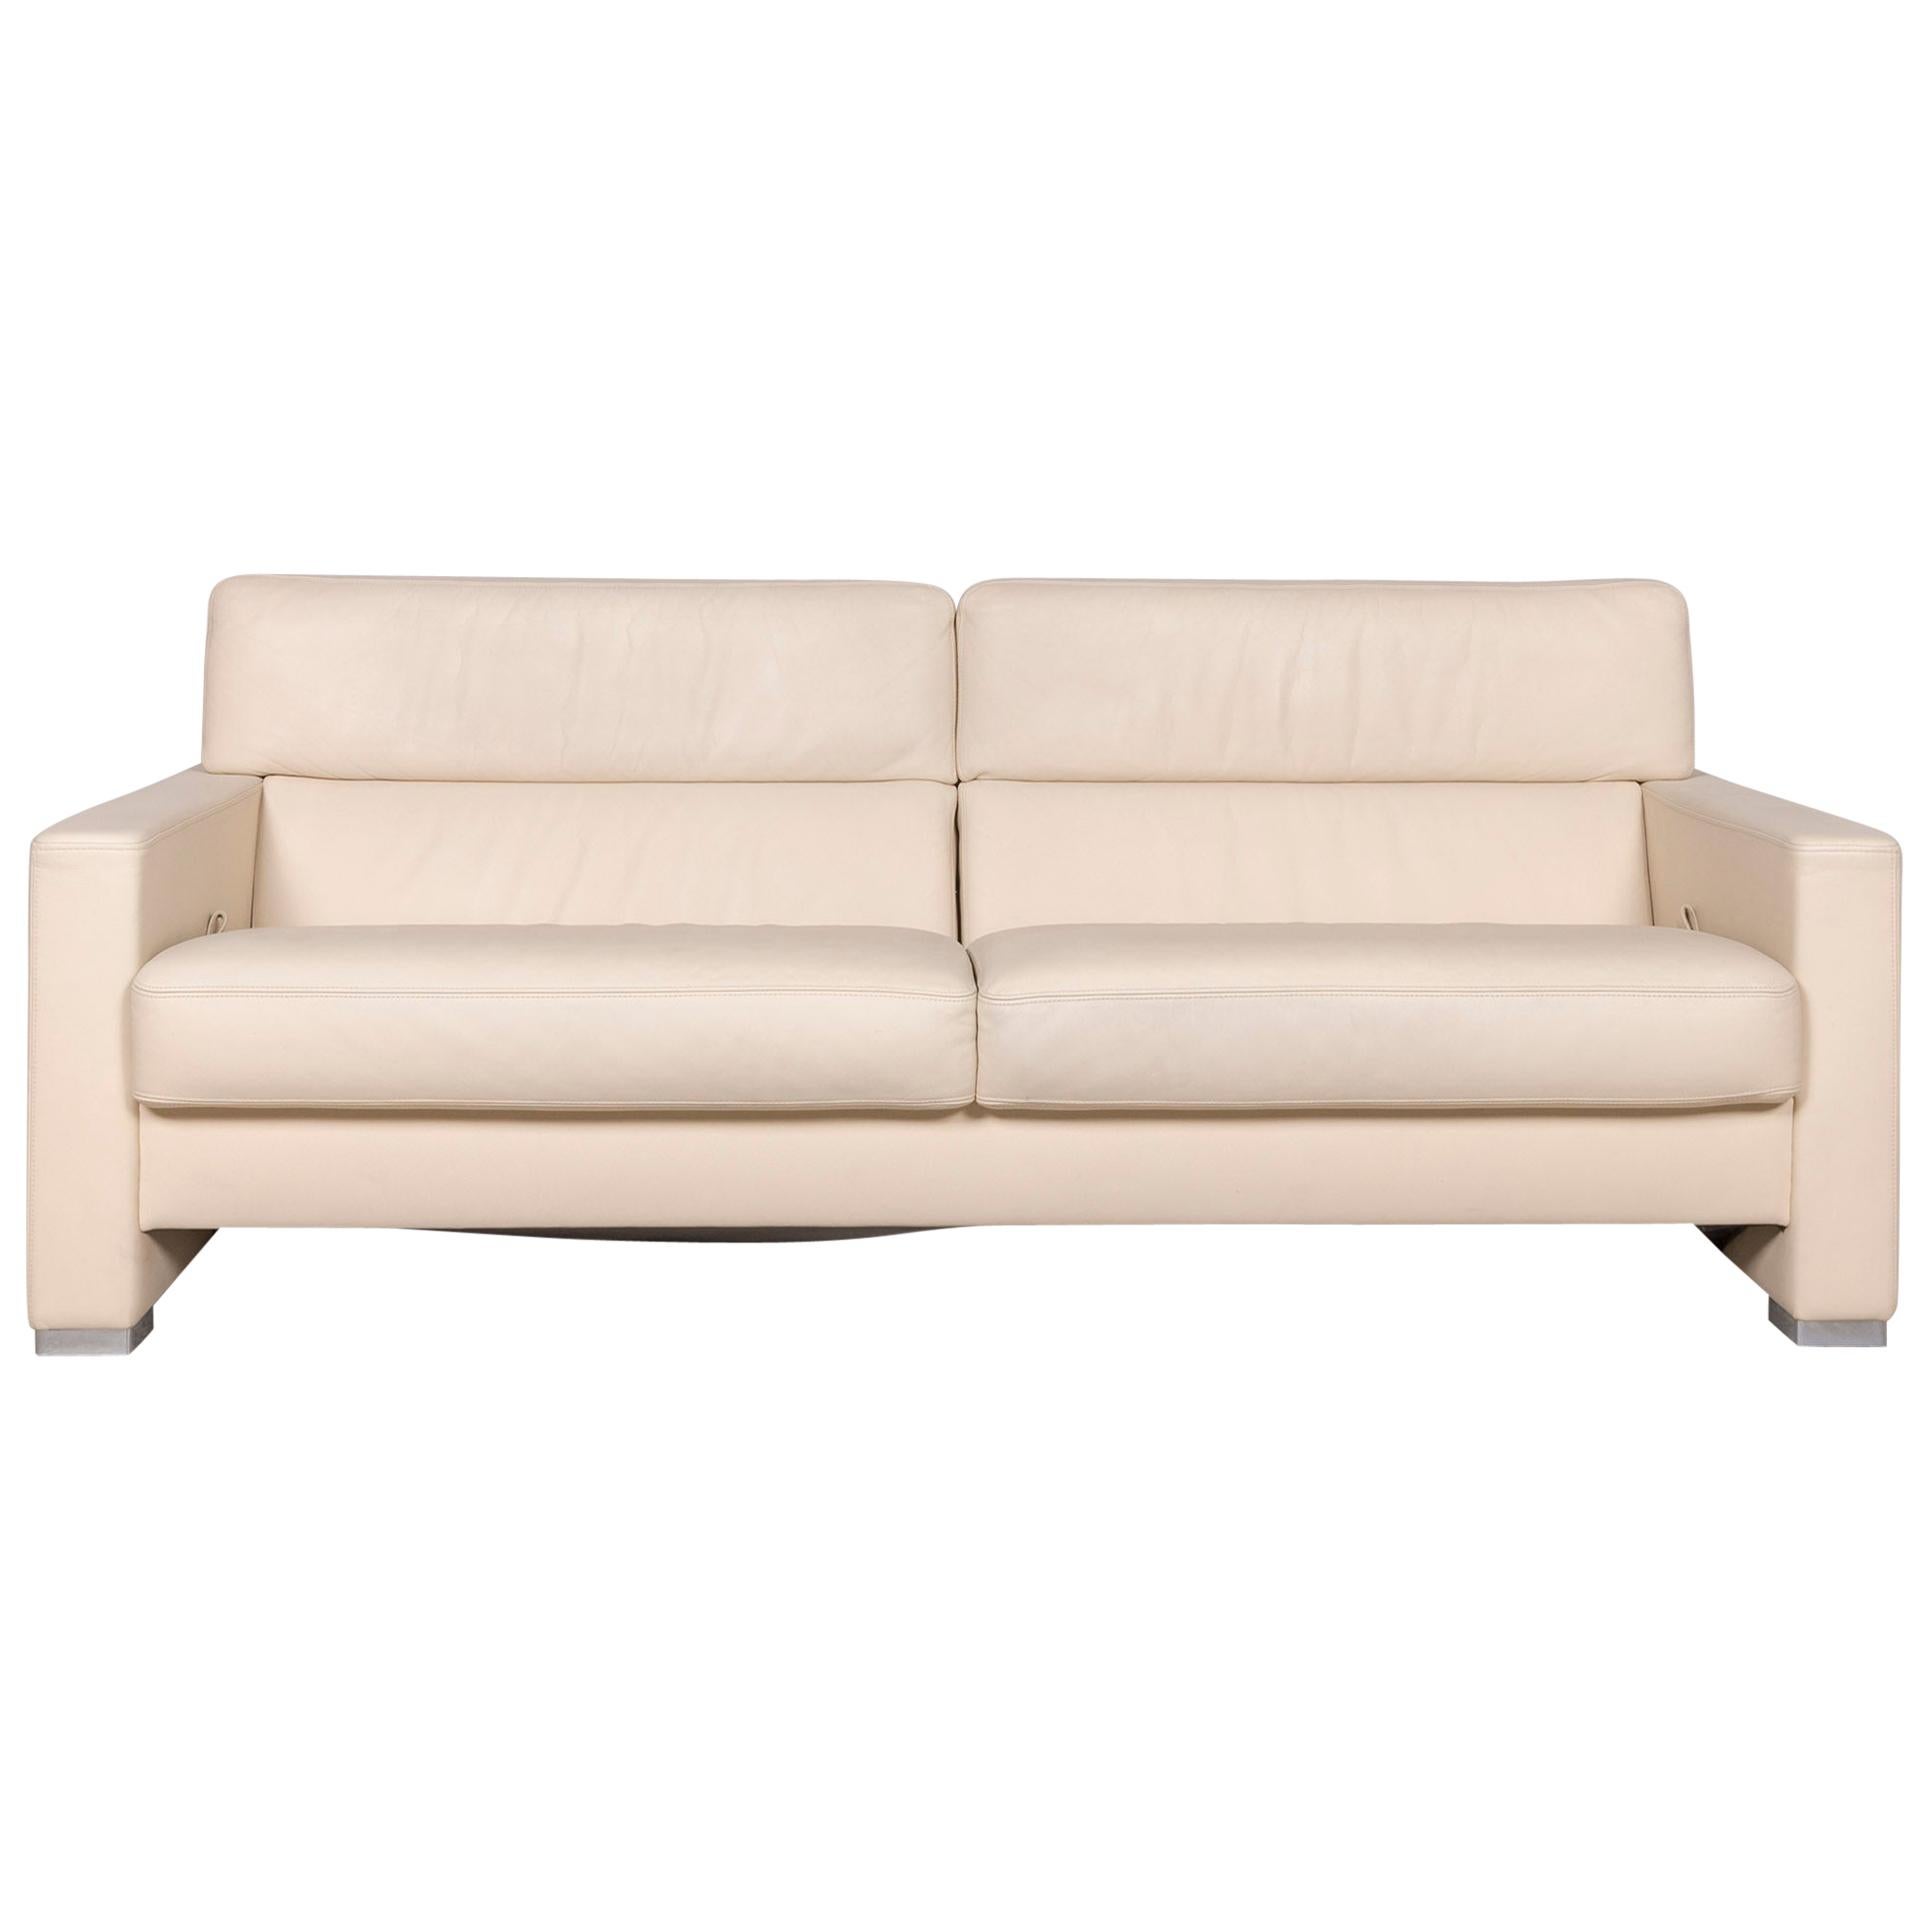 Brühl & Sippold Designer Leather Sofa Beige Three-Seat Real Leather Couch For Sale